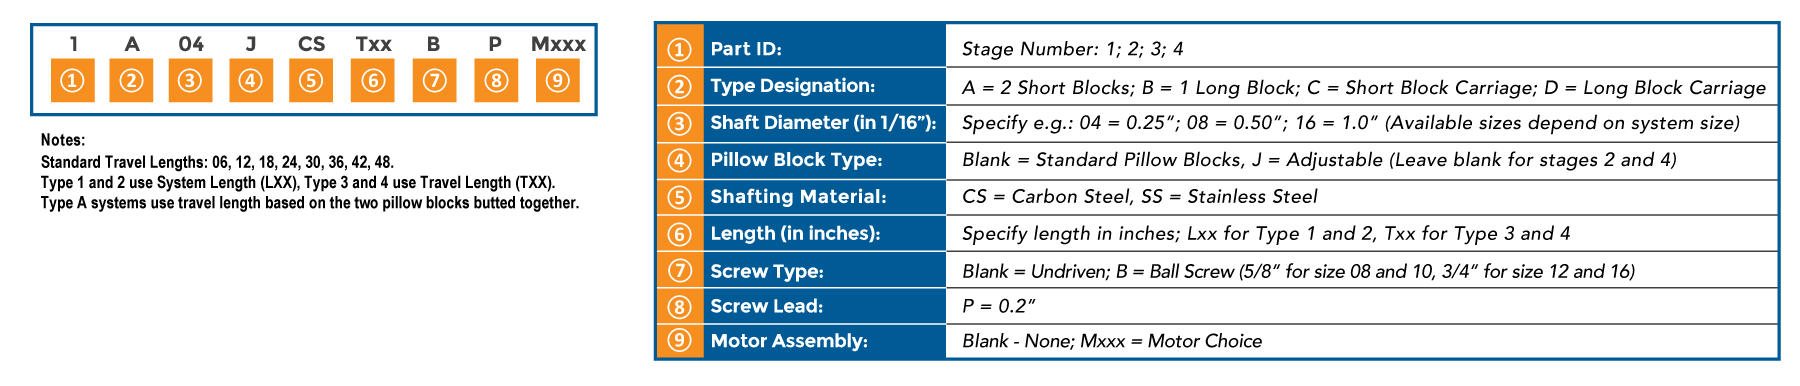 SteadyRail Product Numbering Scheme